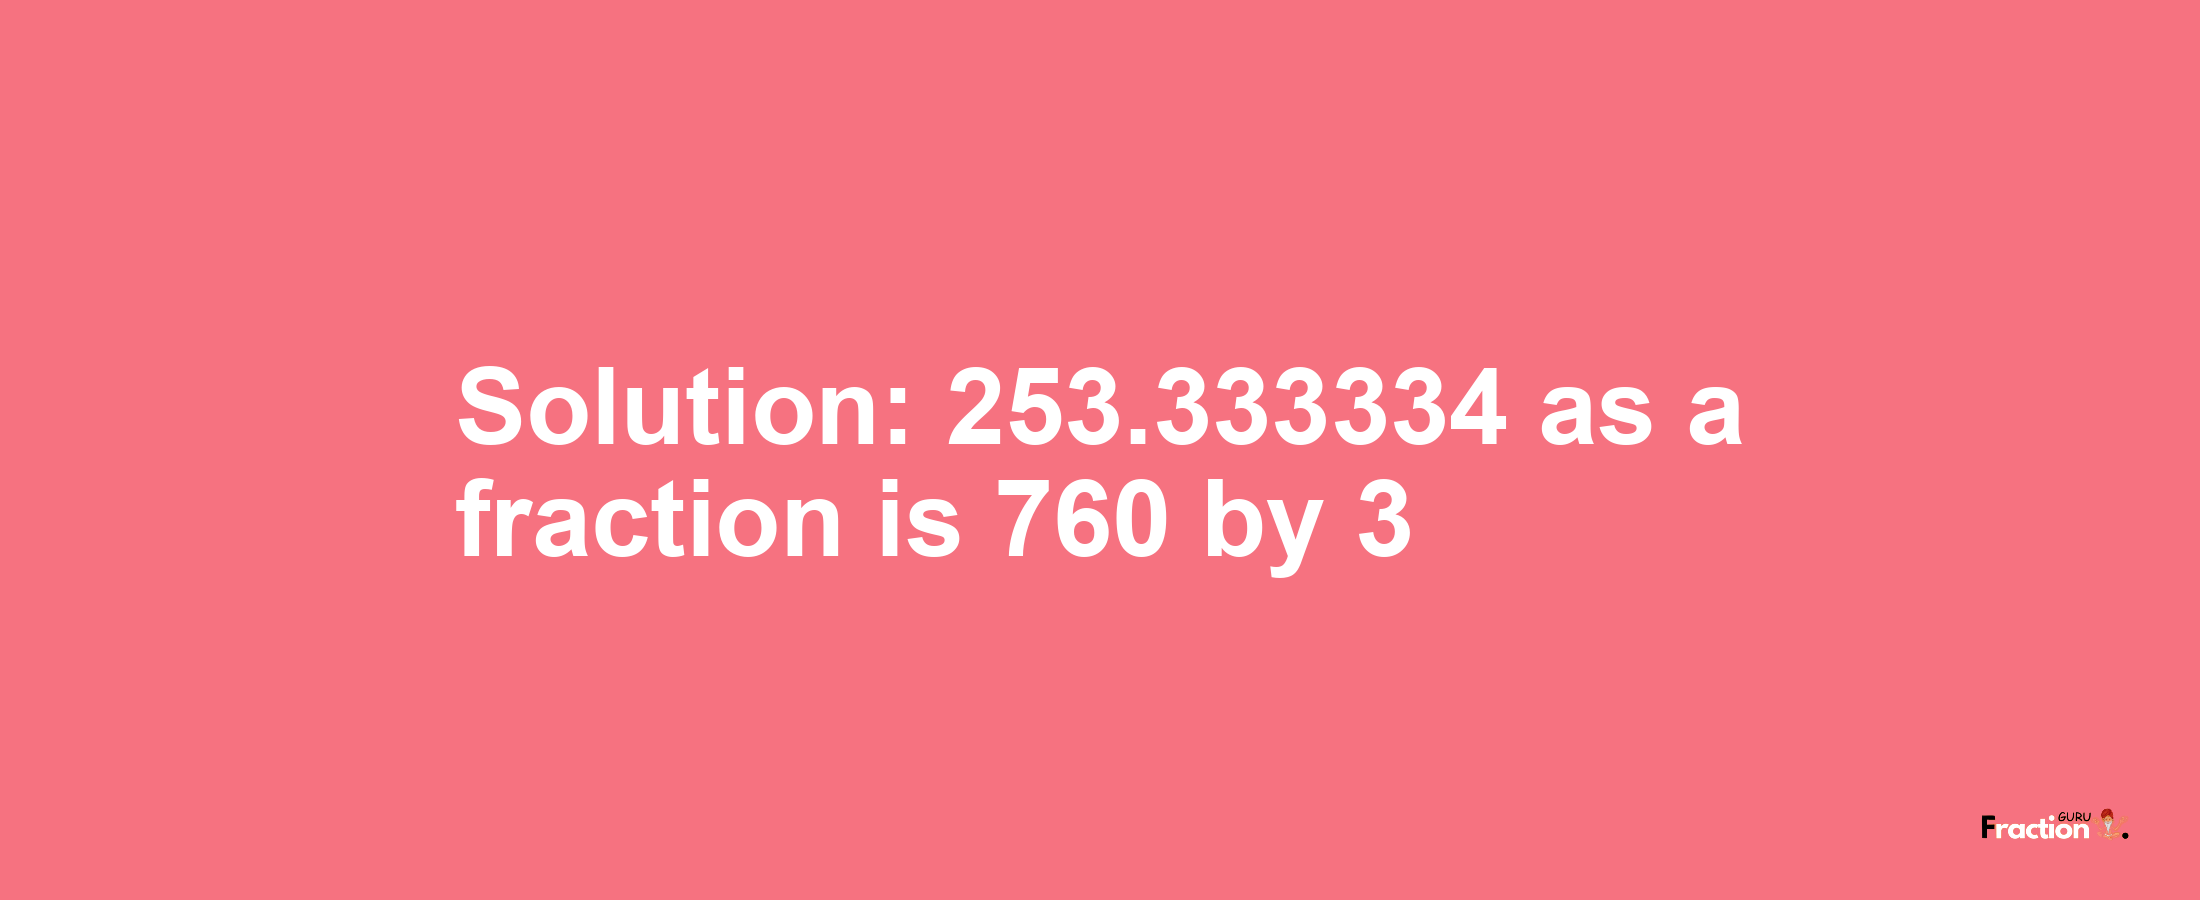 Solution:253.333334 as a fraction is 760/3